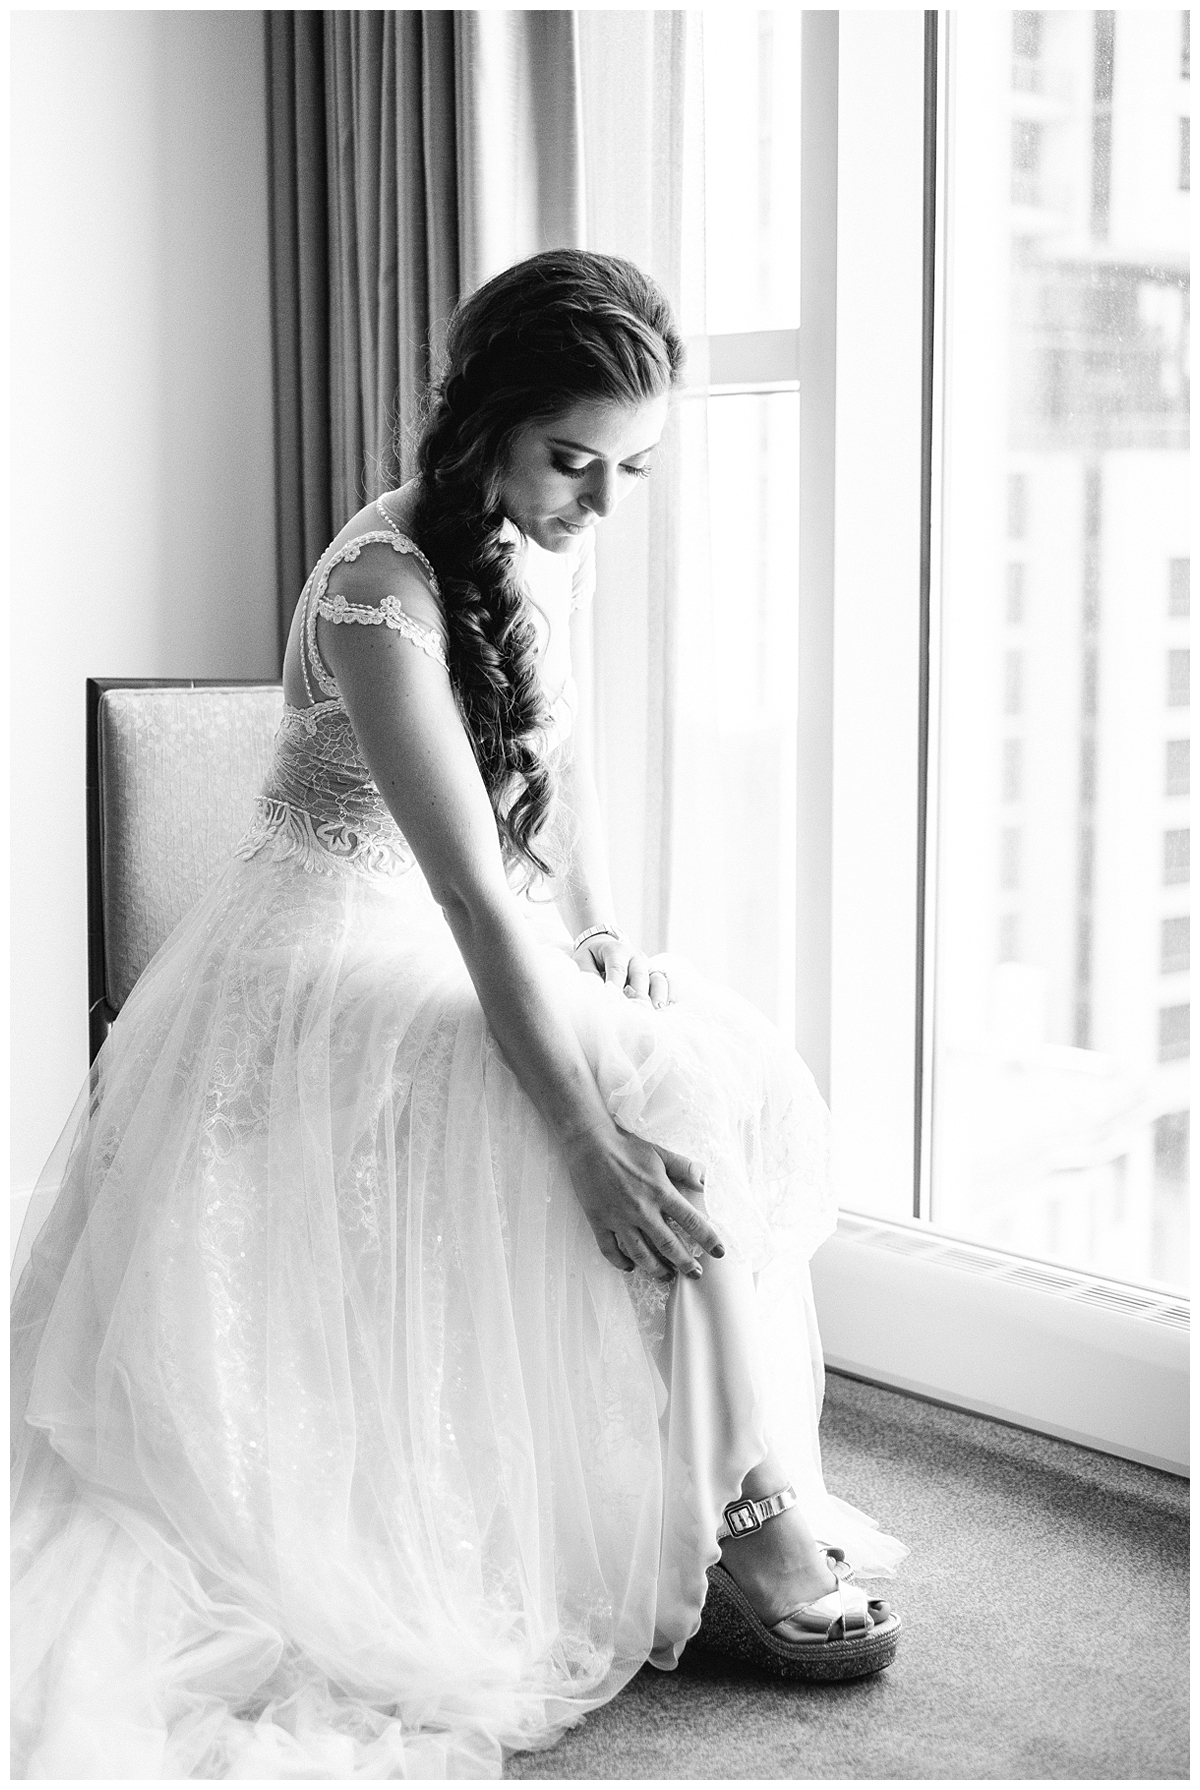 A bride in her wedding gown poses by a window. 